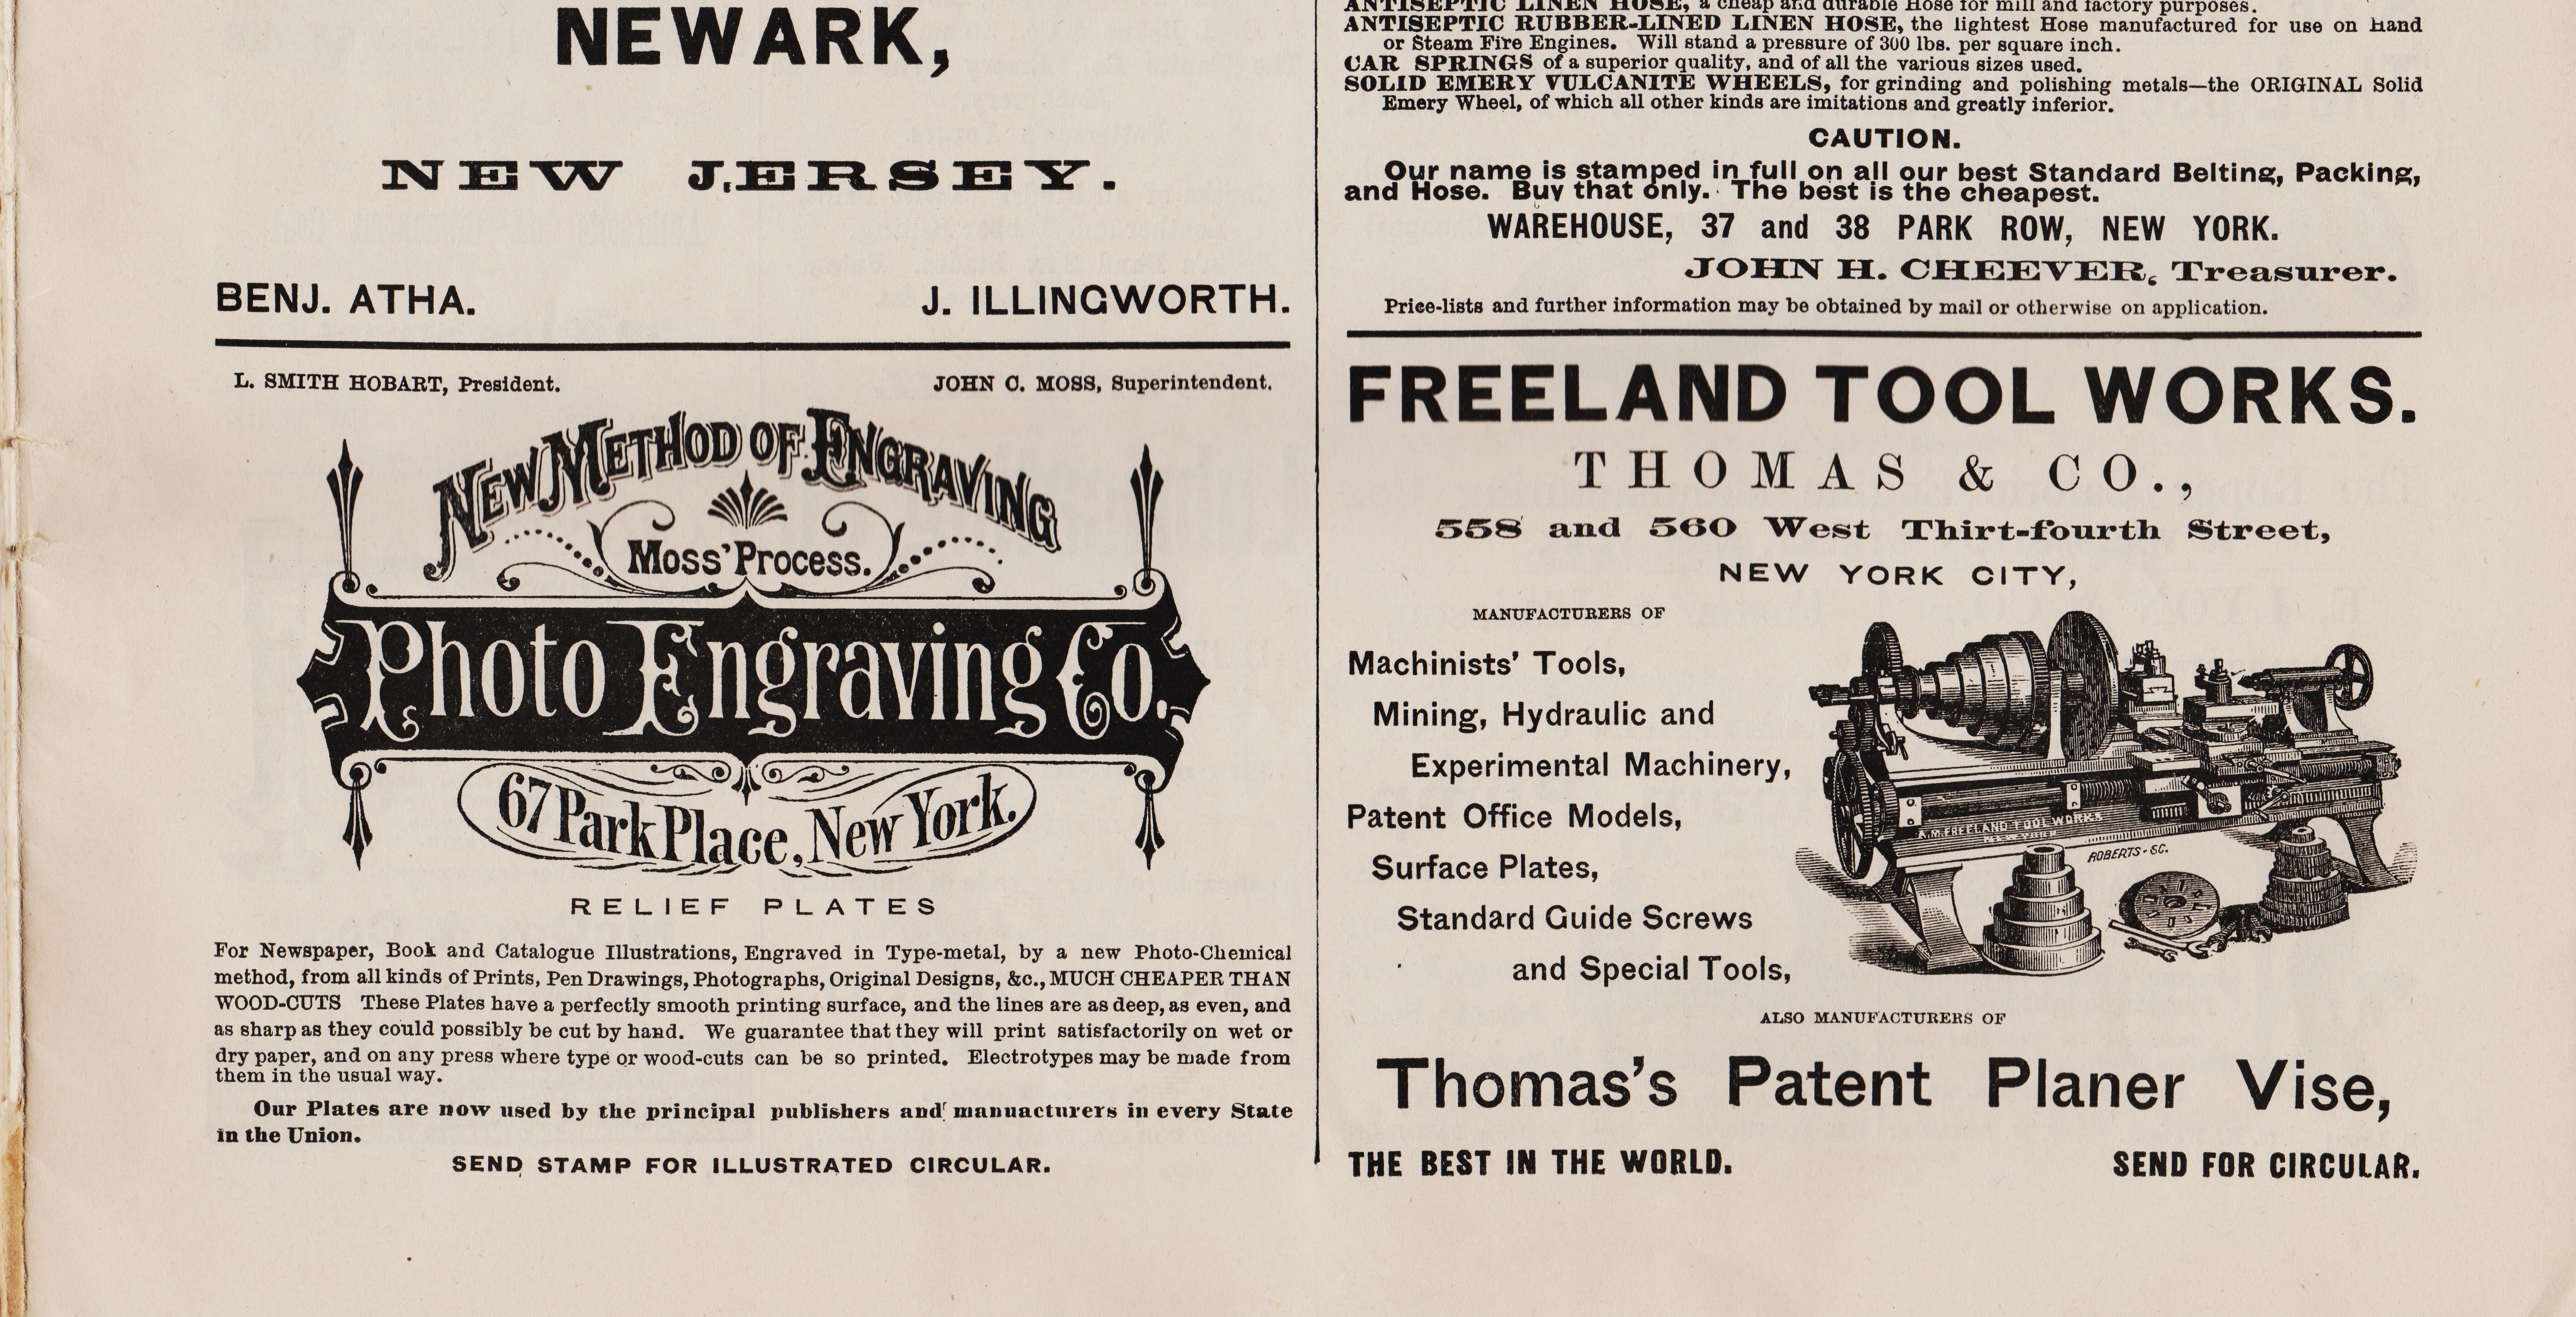 https://antiquemachinery.com/images-2020/American_Machinist-March-15-1894-page-17-bot-Ads.jpg